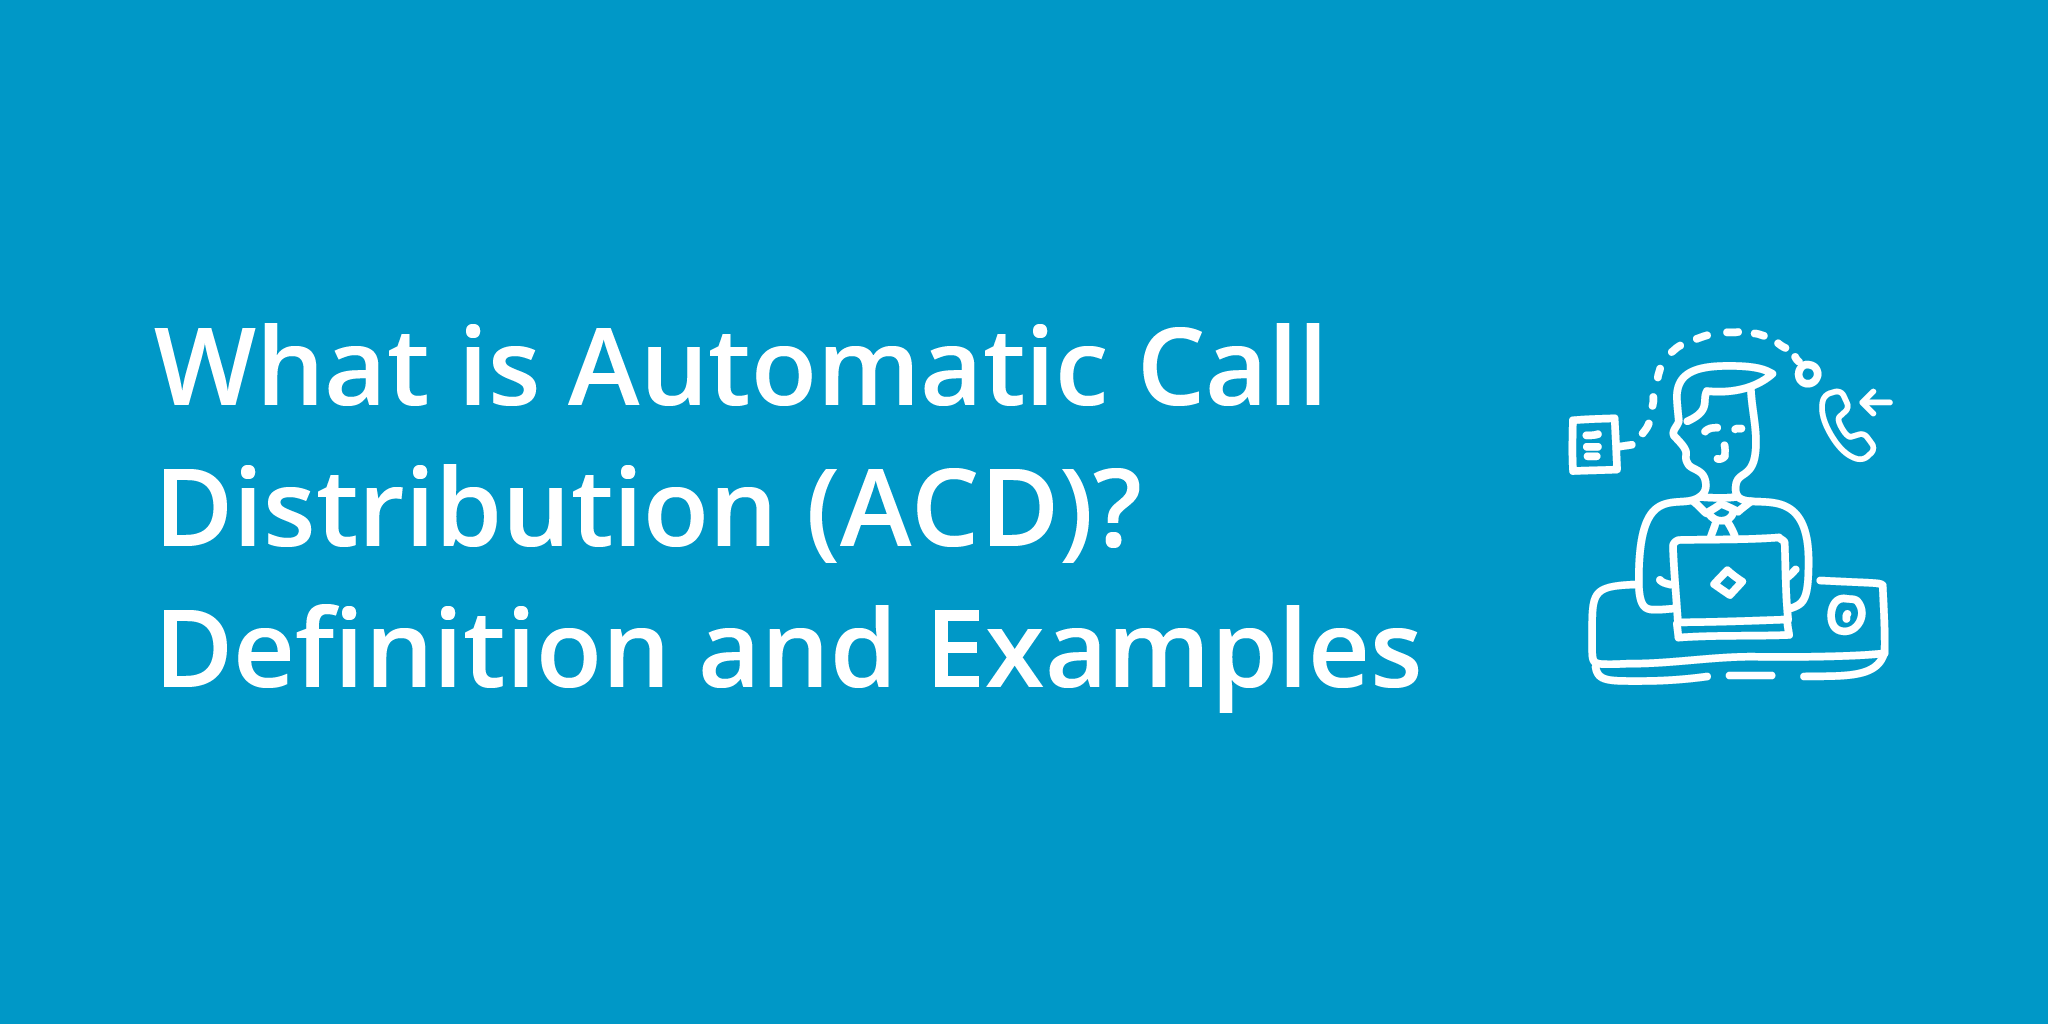 What is Automatic Call Distribution (ACD)? Definition and Examples